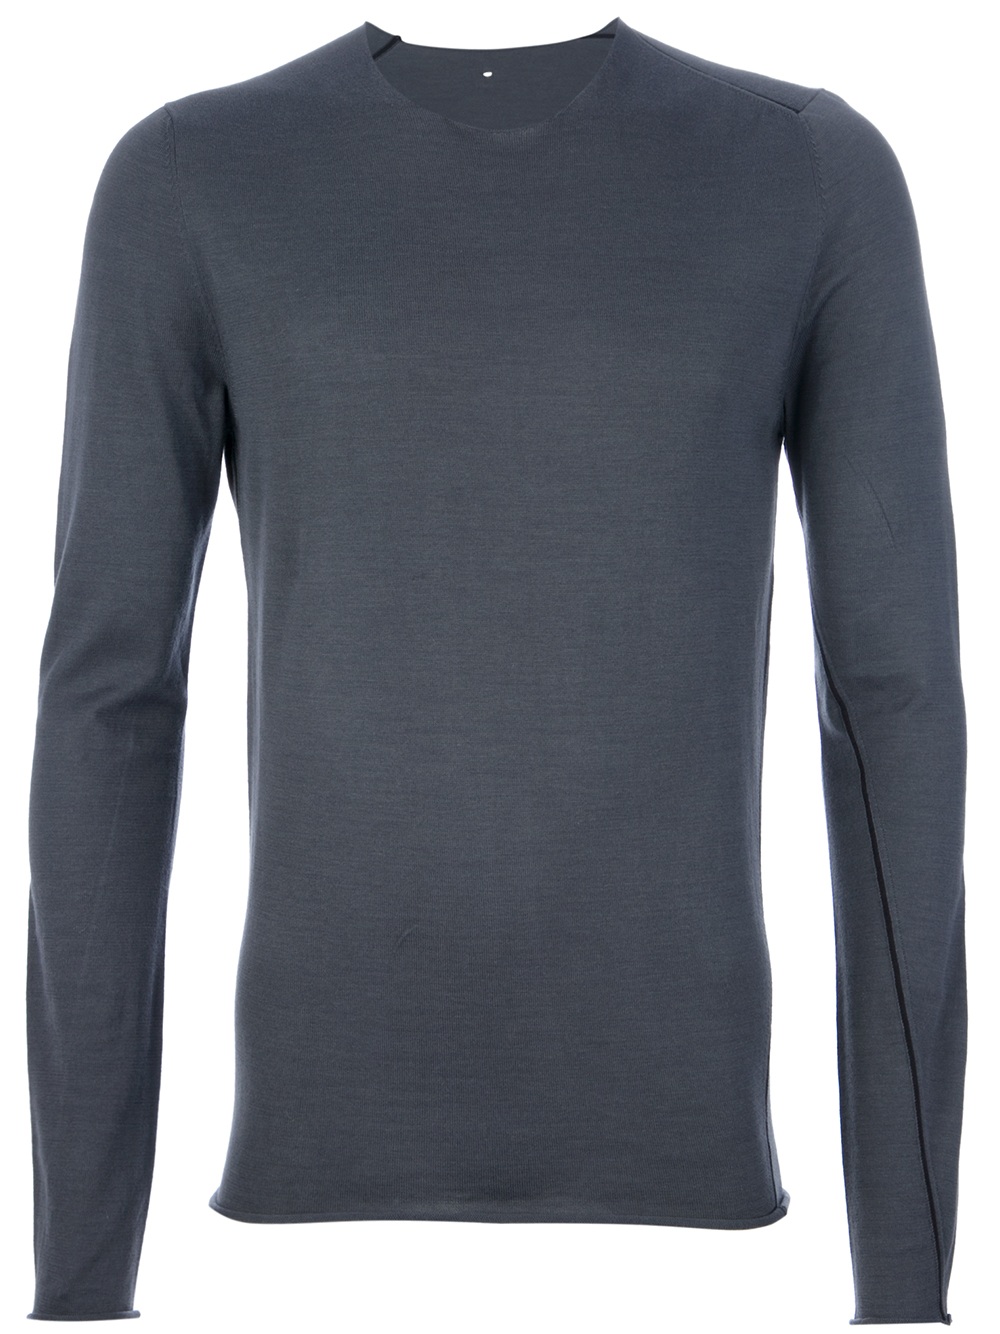 Lyst - Label Under Construction Long Sleeve Tshirt in Gray for Men